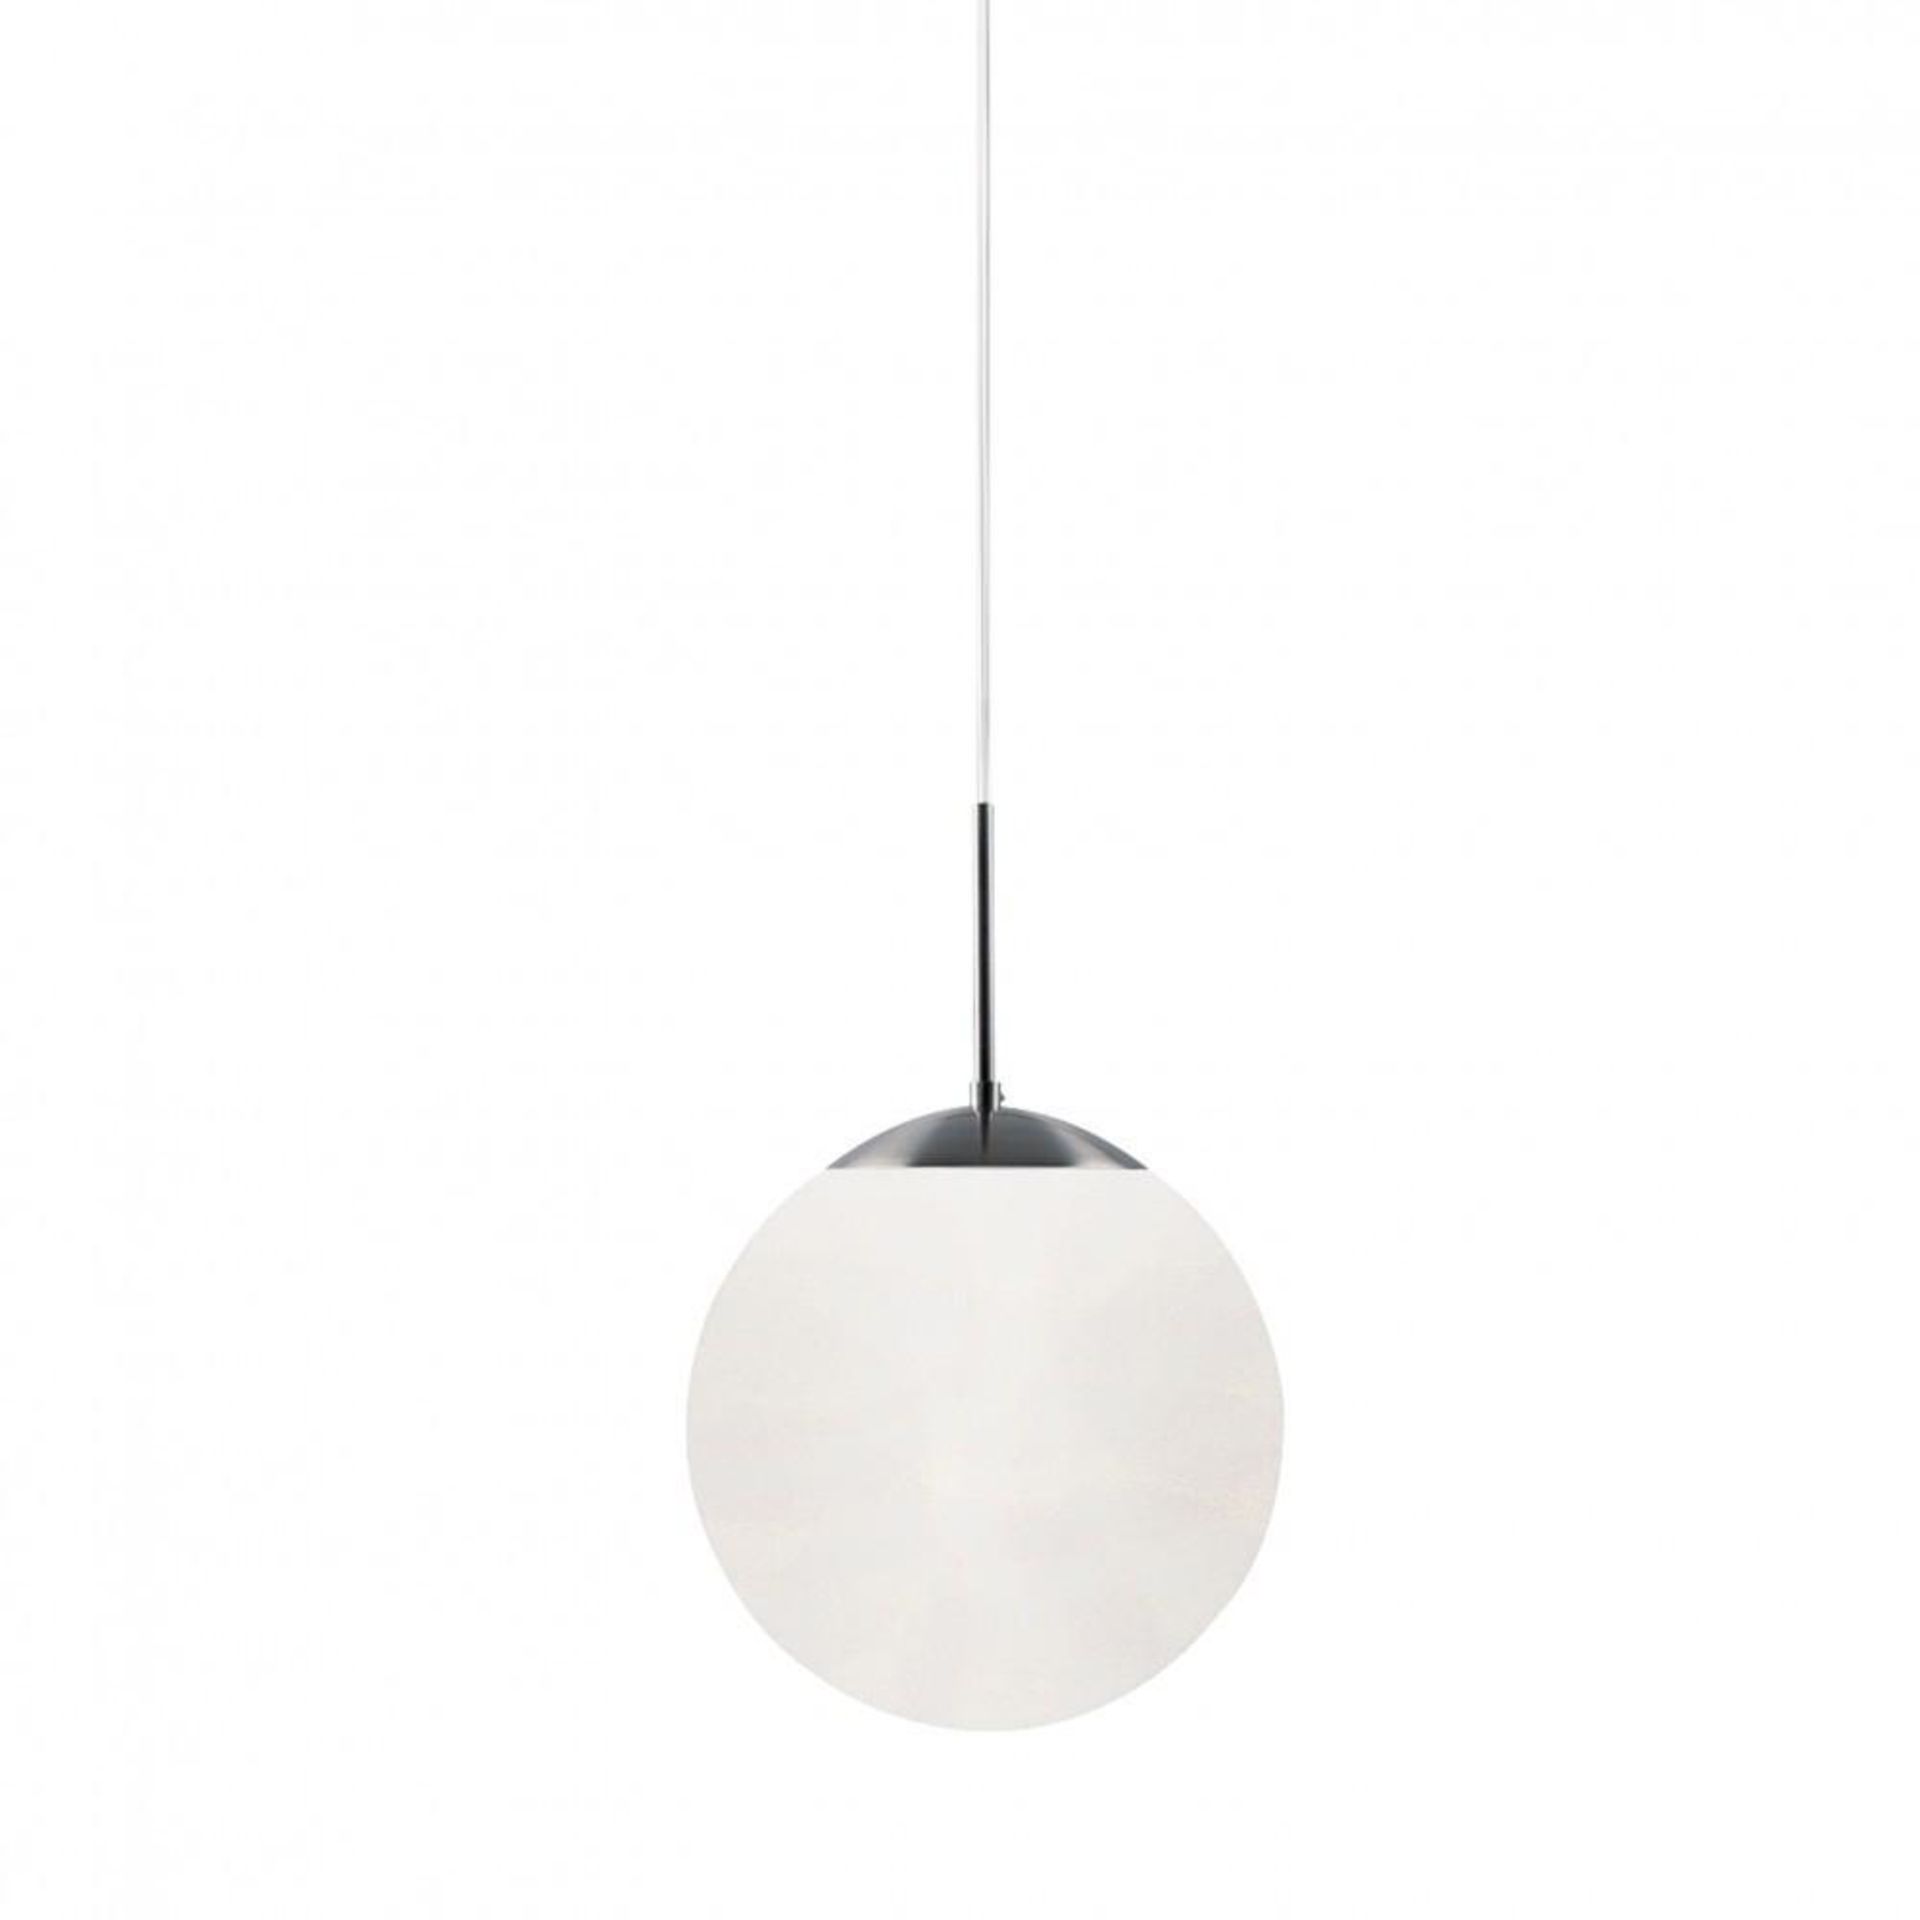 Cafe Pendant Opal White Pendant Light - Nordlux, 15 - ER46. Bring a warm and inviting atmosphere